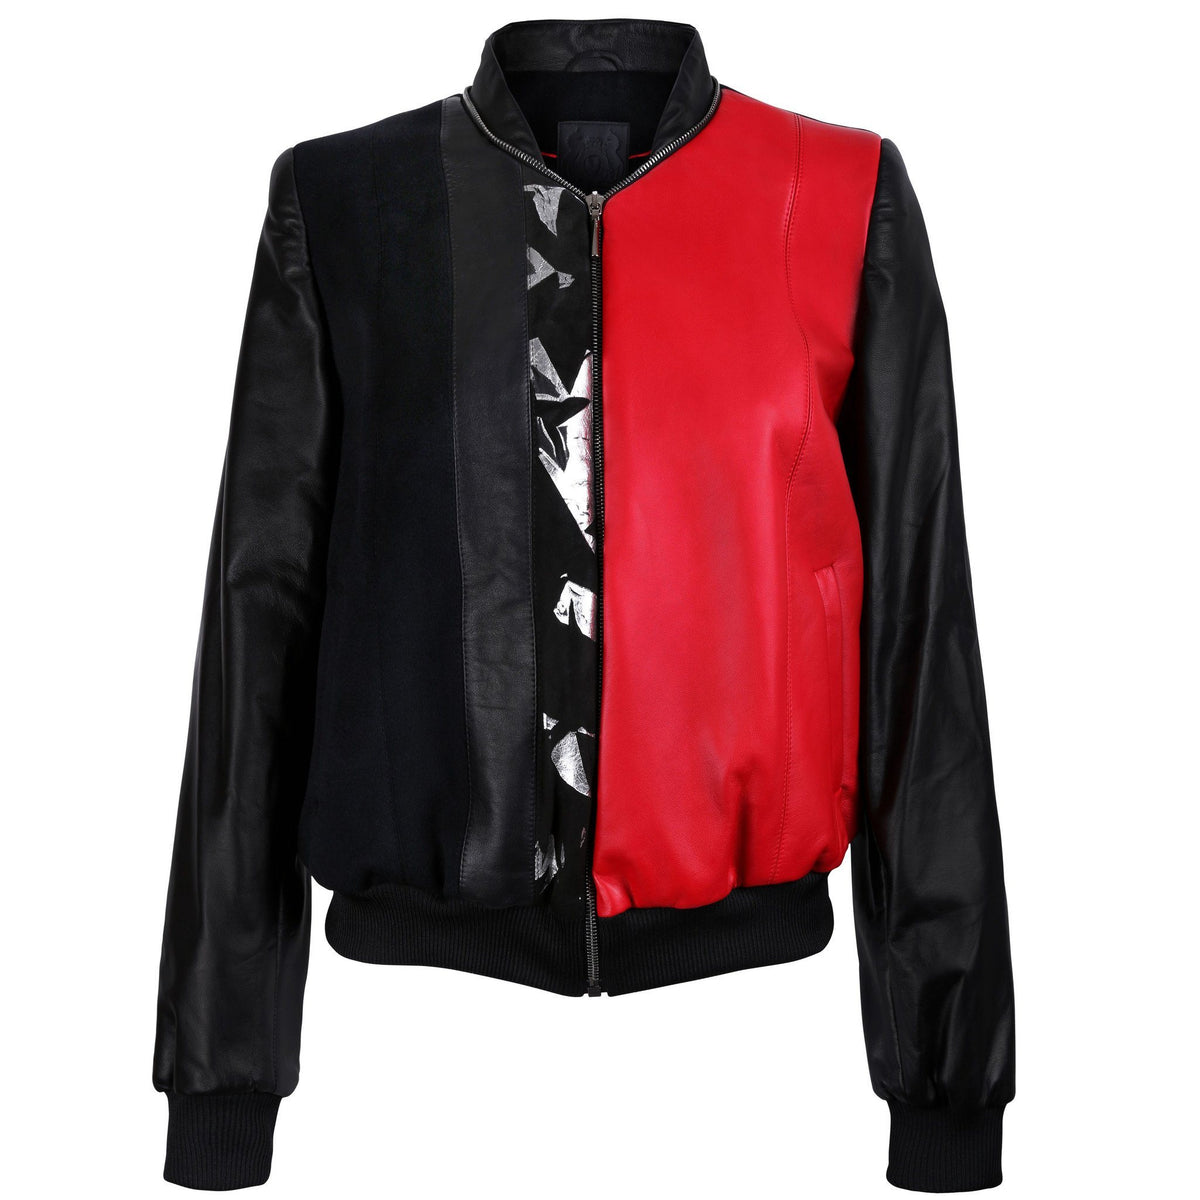 Black and Red Leather Bomber Jacket with Silver Print Motif - VOLS &amp; ORIGINAL